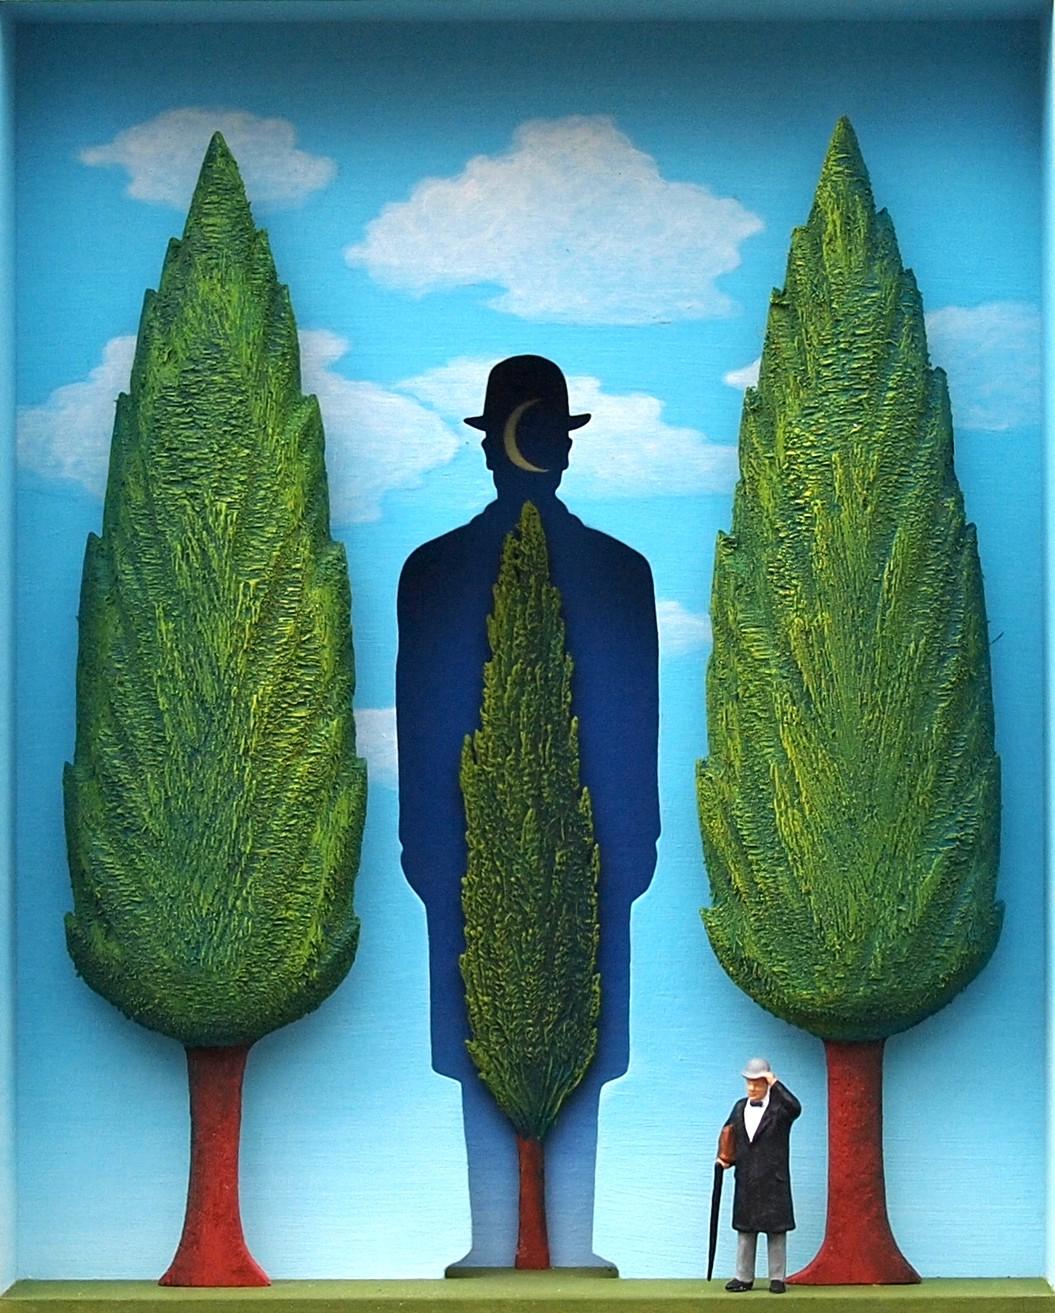 The Garden of Magritte - contemporary art work homage to Belgian surrealist 